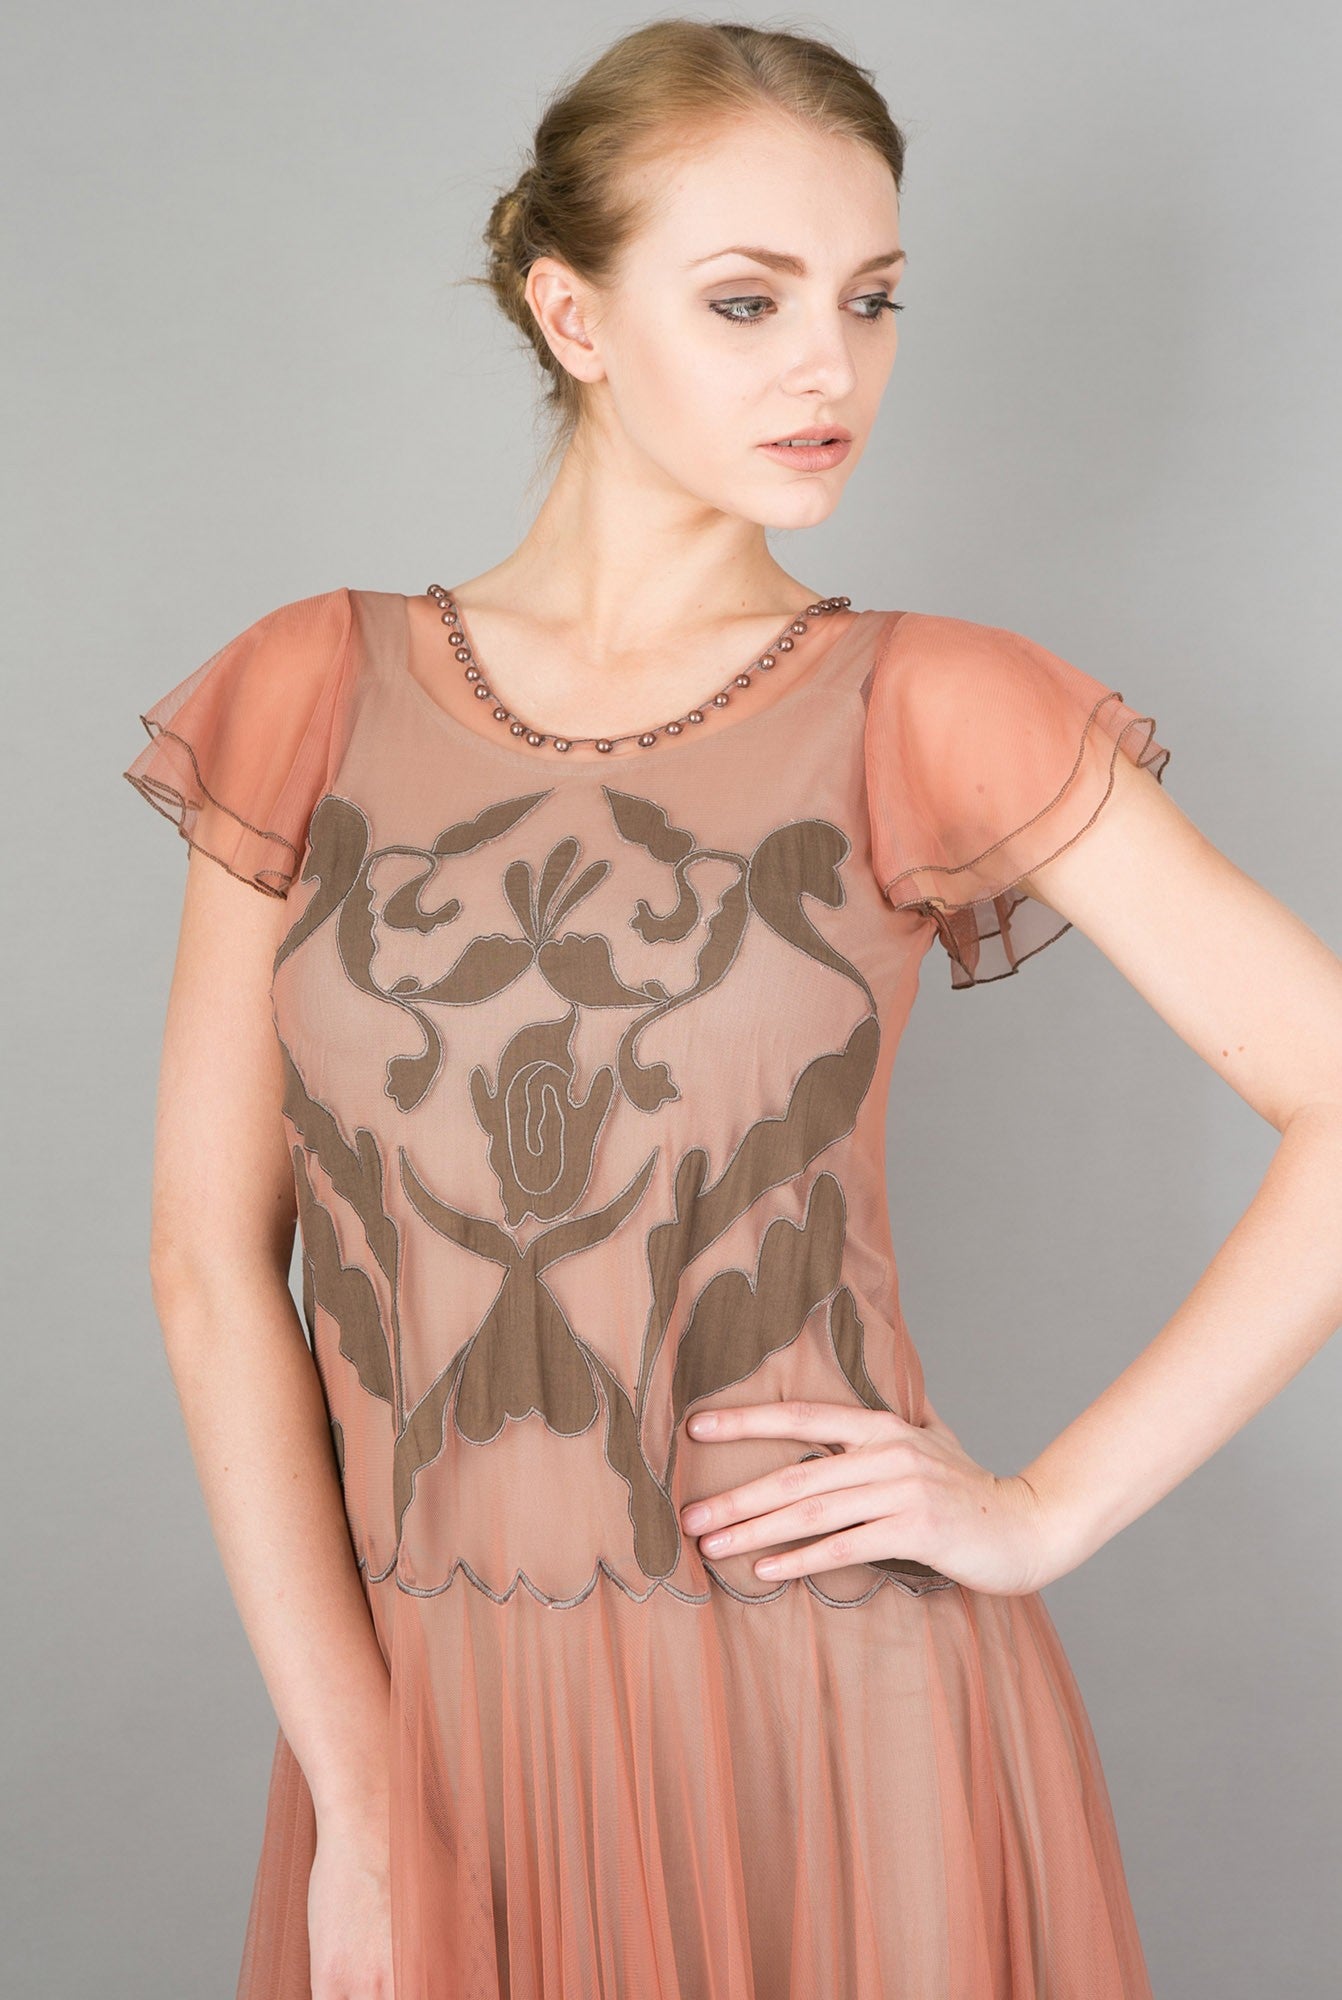 Downton Abbey Romantic Vienna Party Dress in Rose-Silver by Nataya - SOLD OUT